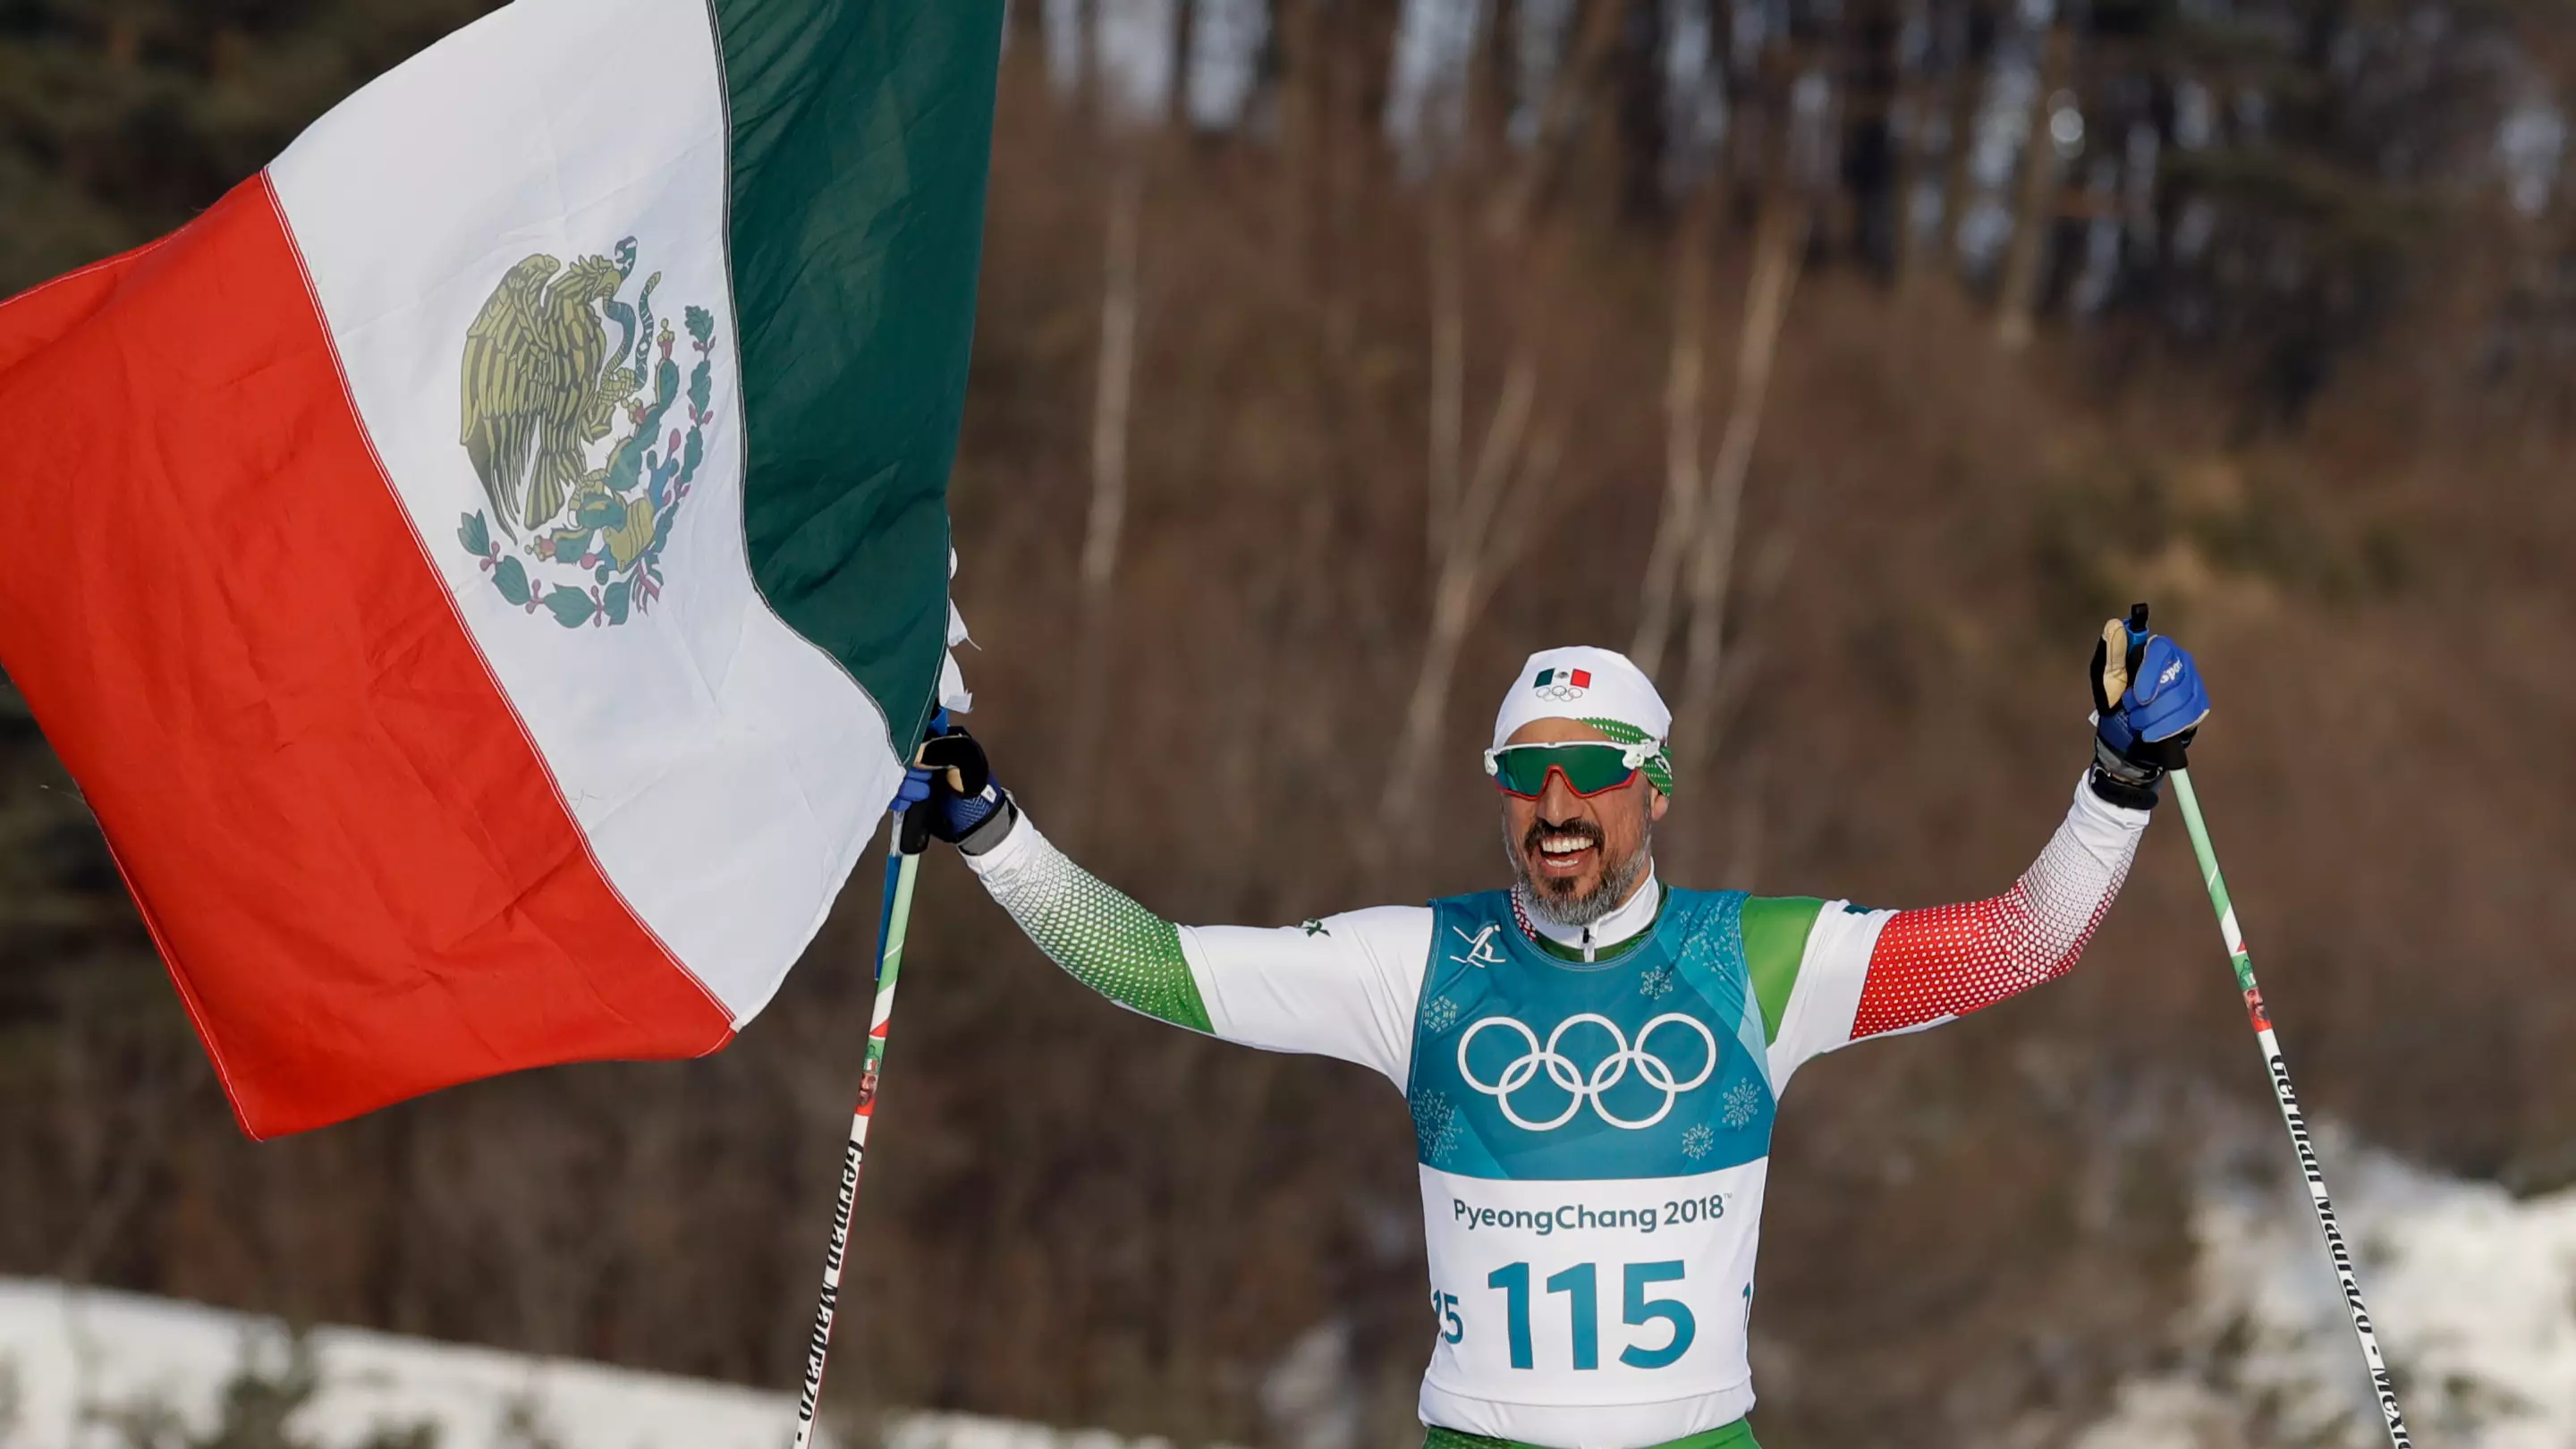 Mexican Skier Gets Heroes Welcome Despite Finishing Last